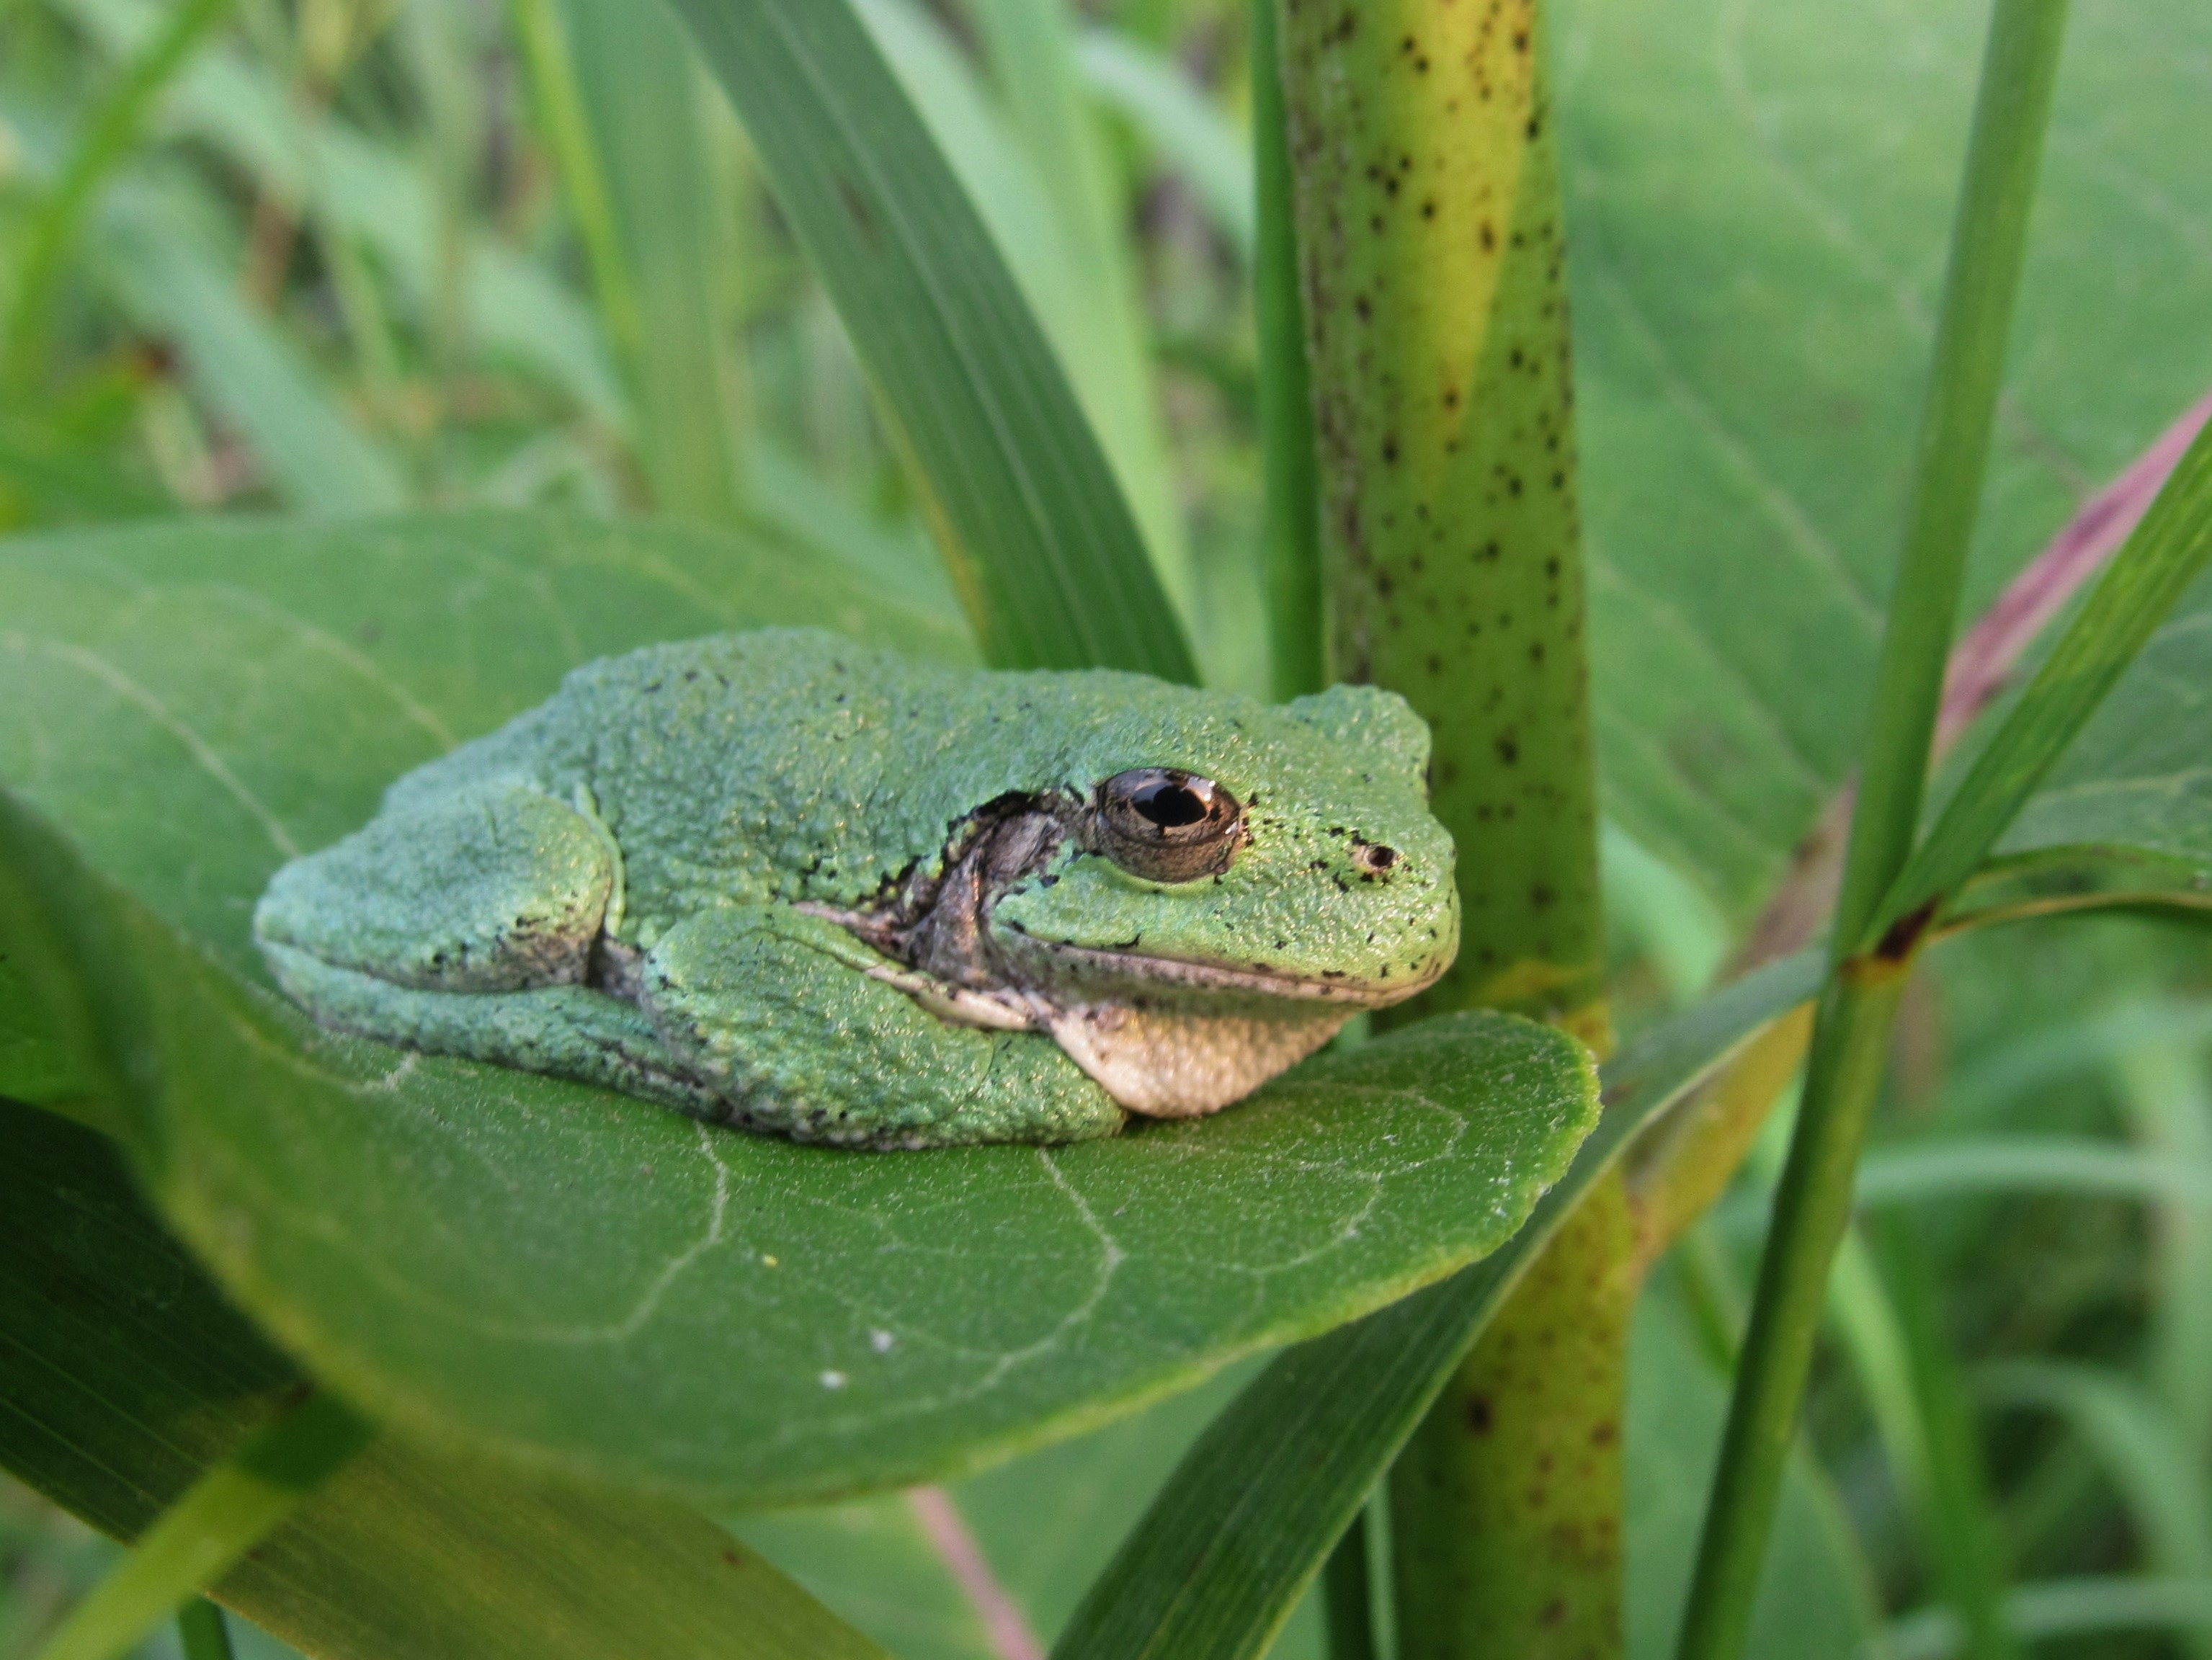 A gray tree frog (green in color) sits resting on a leaf.